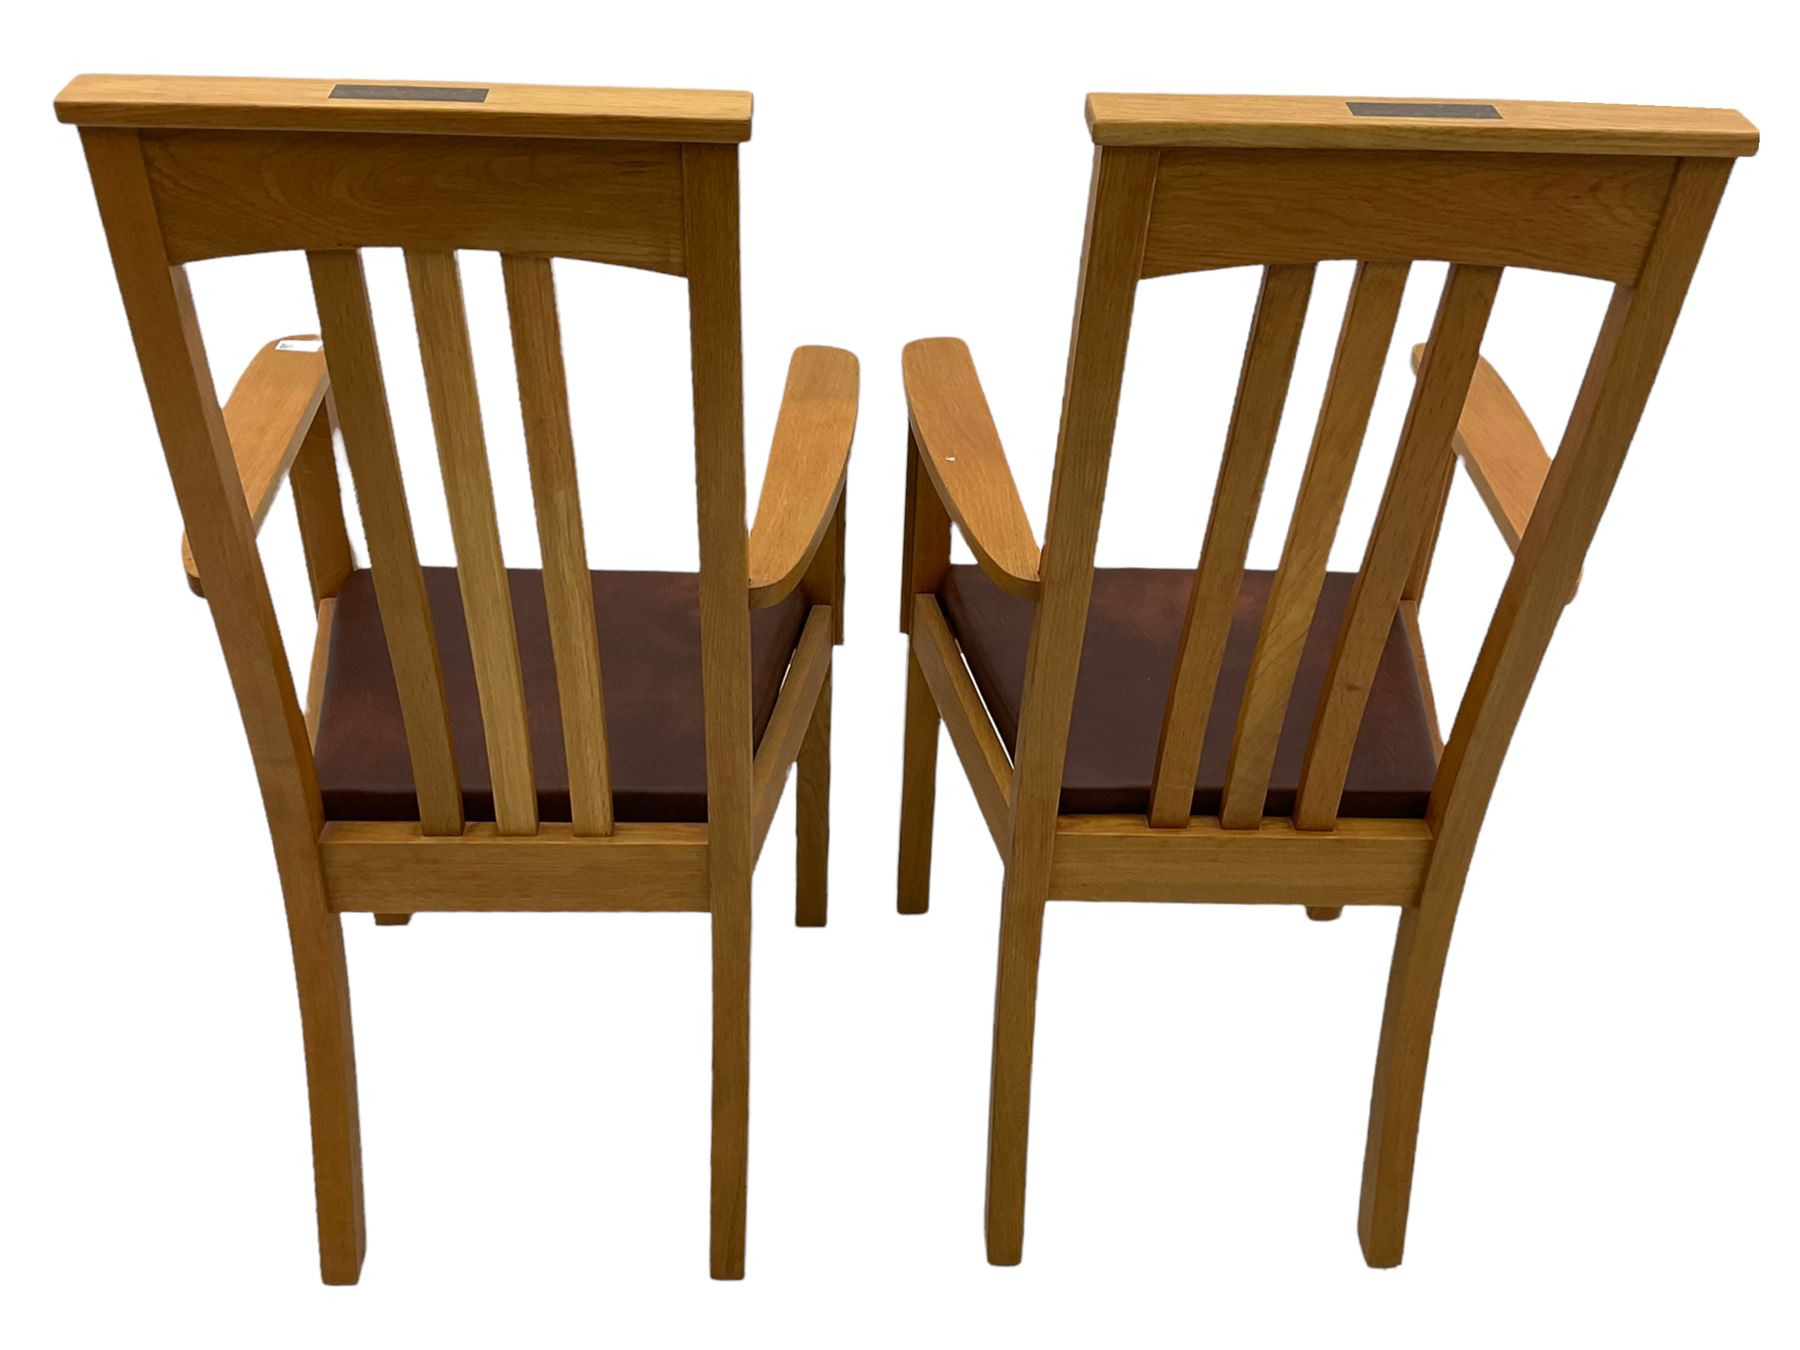 Pair of solid oak Arts and Crafts style carver chairs - Image 4 of 4